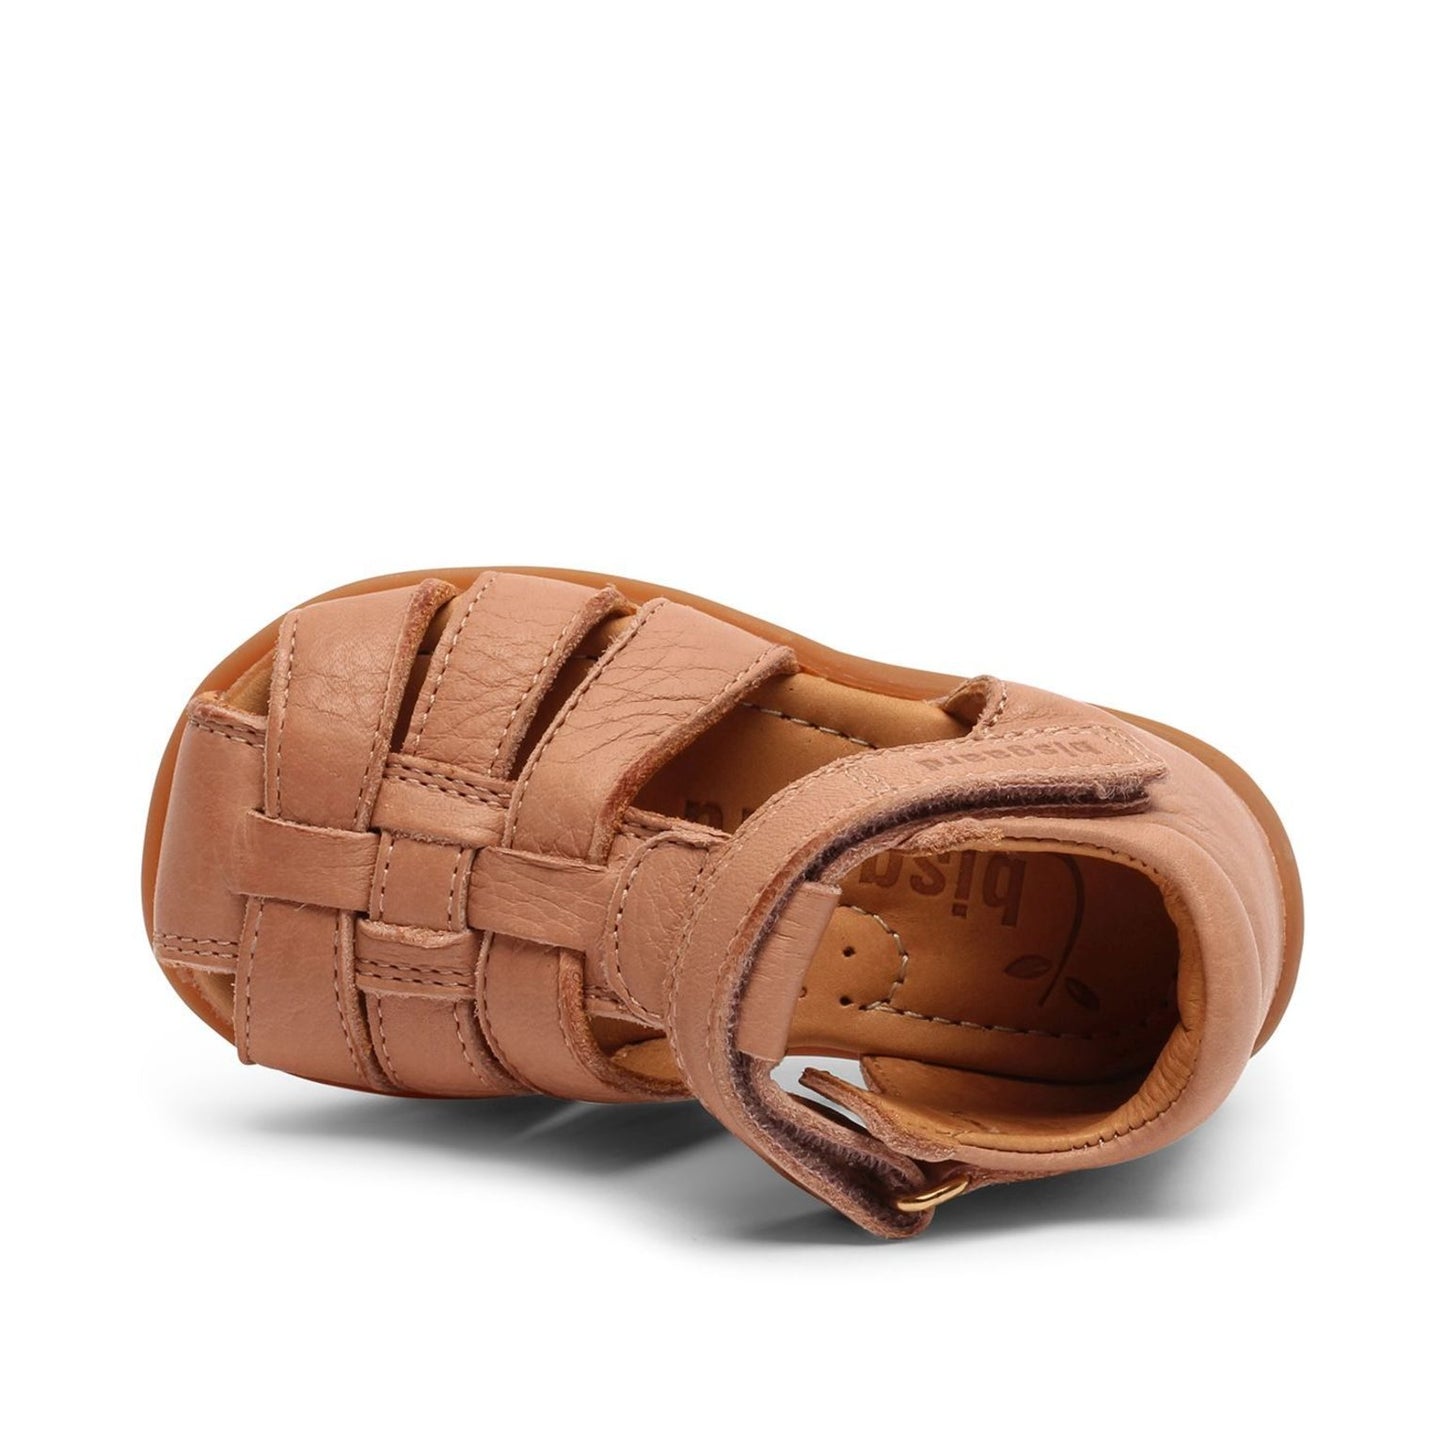 Carly Sandals, Nude